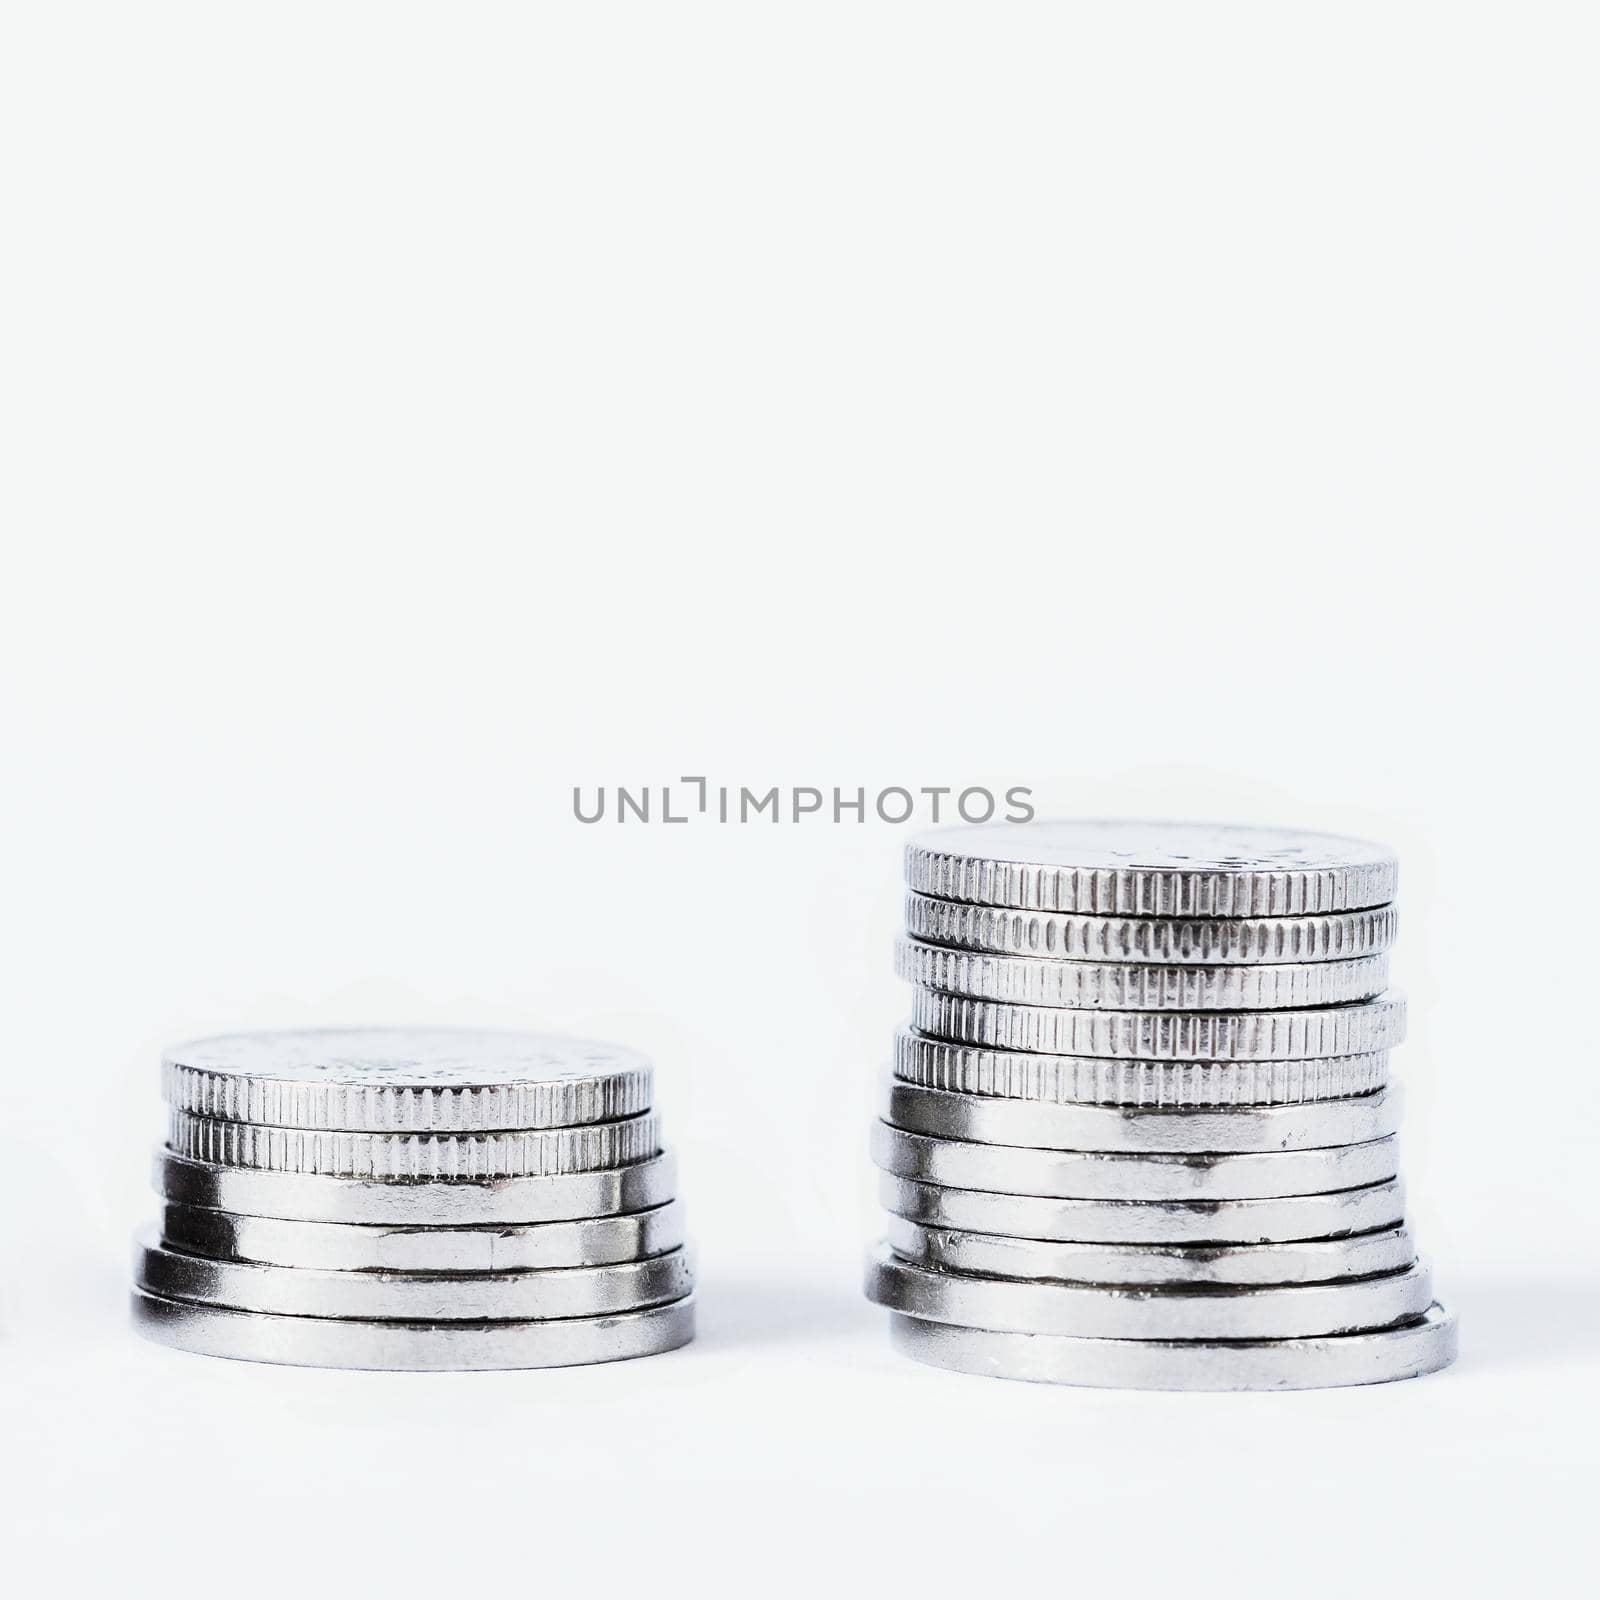 Small money - coins. Czech crown.Isolated on a clean white background by Montypeter